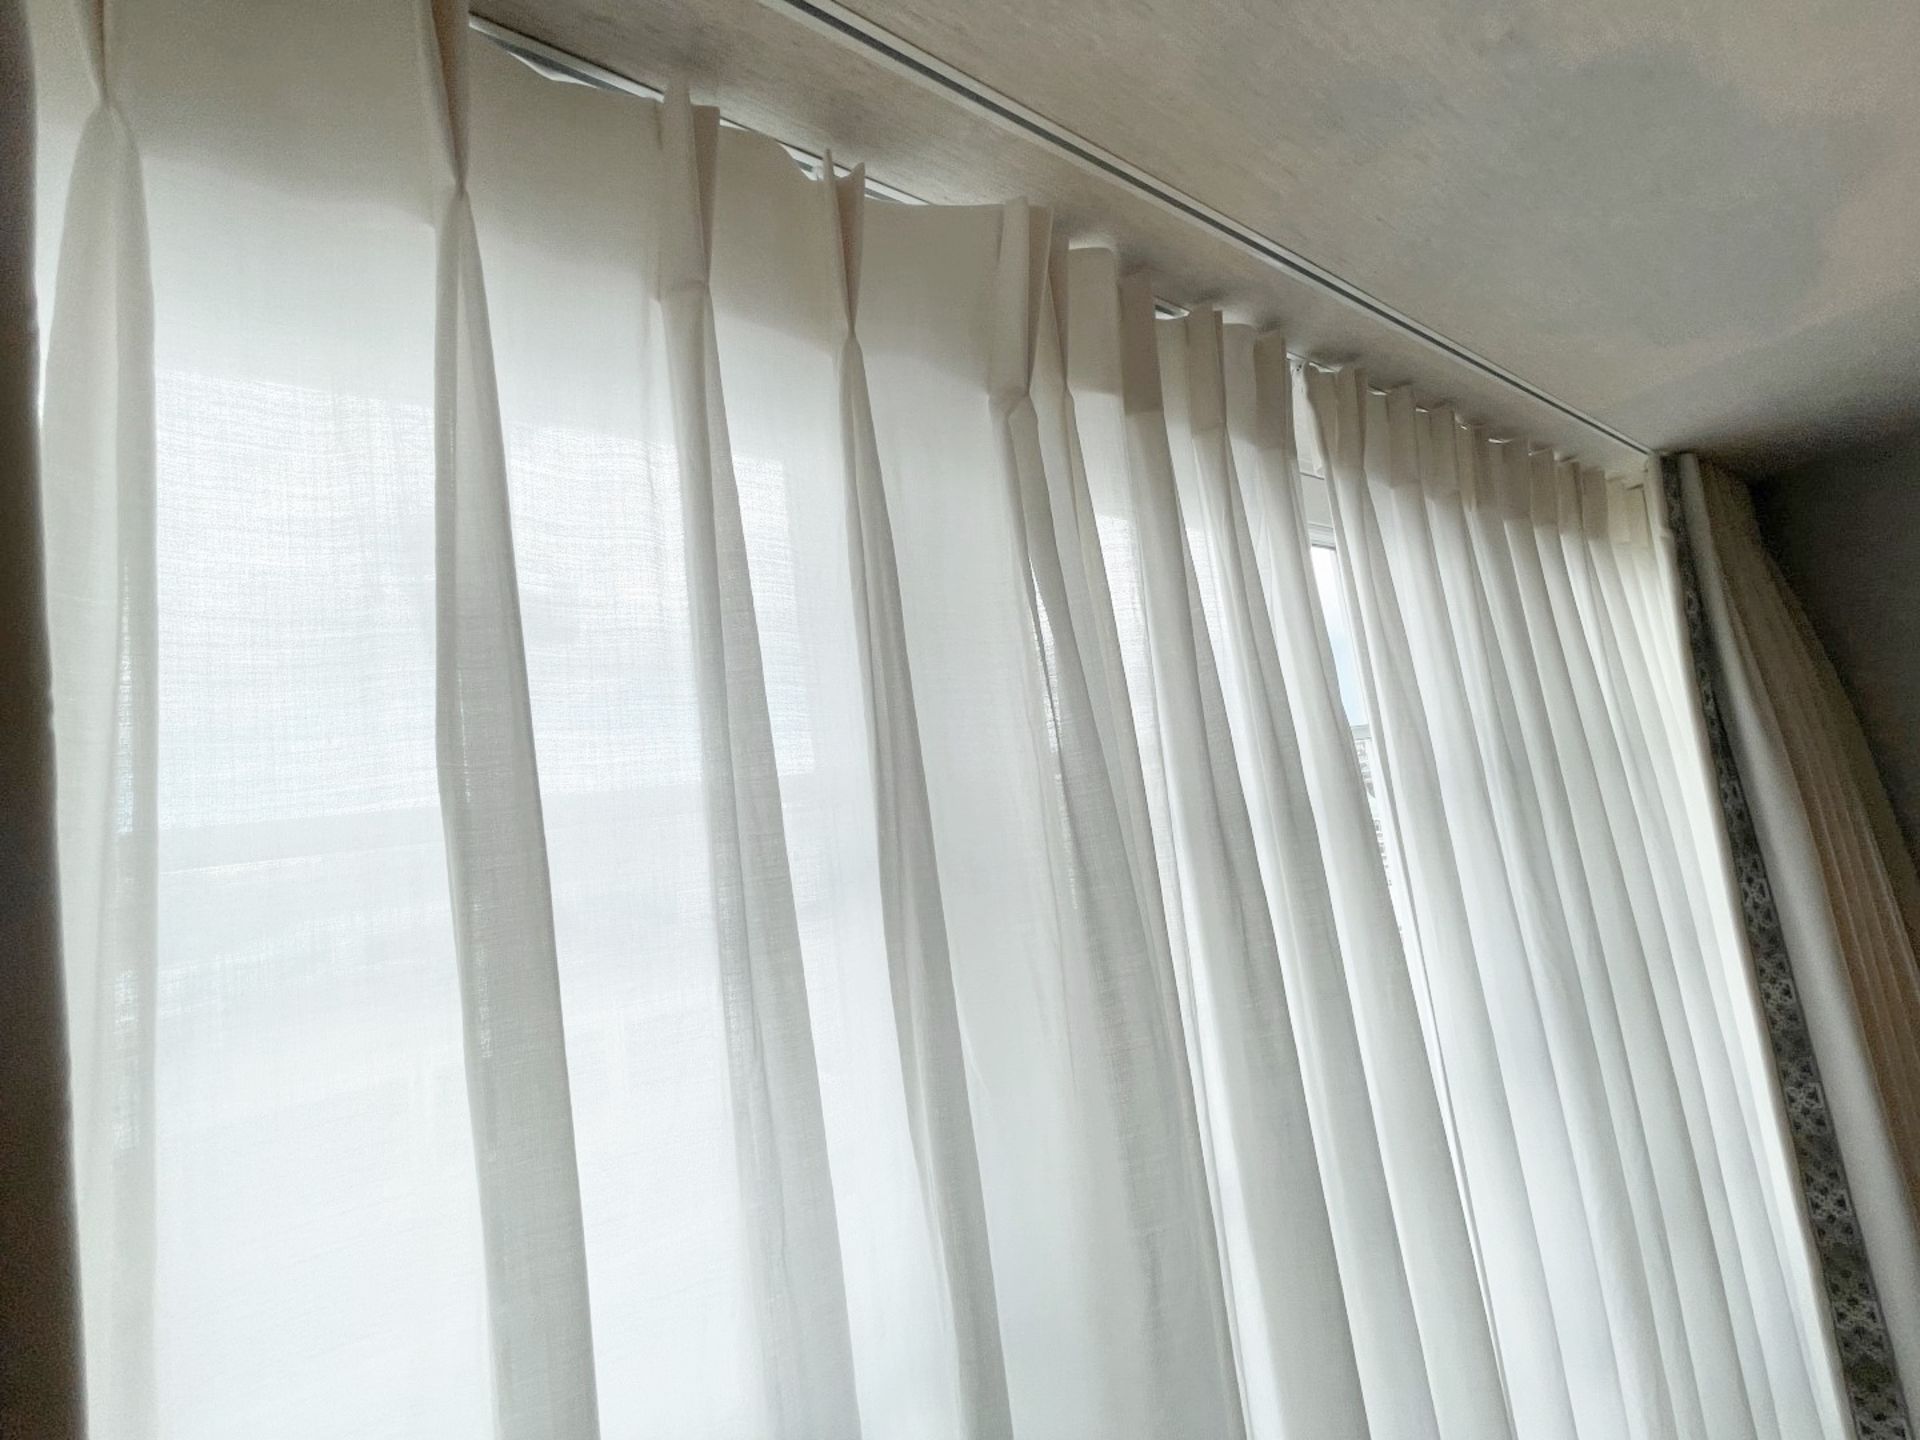 4 x Bespoke Made To Measure Premium Lined Curtains - Includes 1 x Pair & 2 x Single Blinds + Voiles - Image 4 of 13